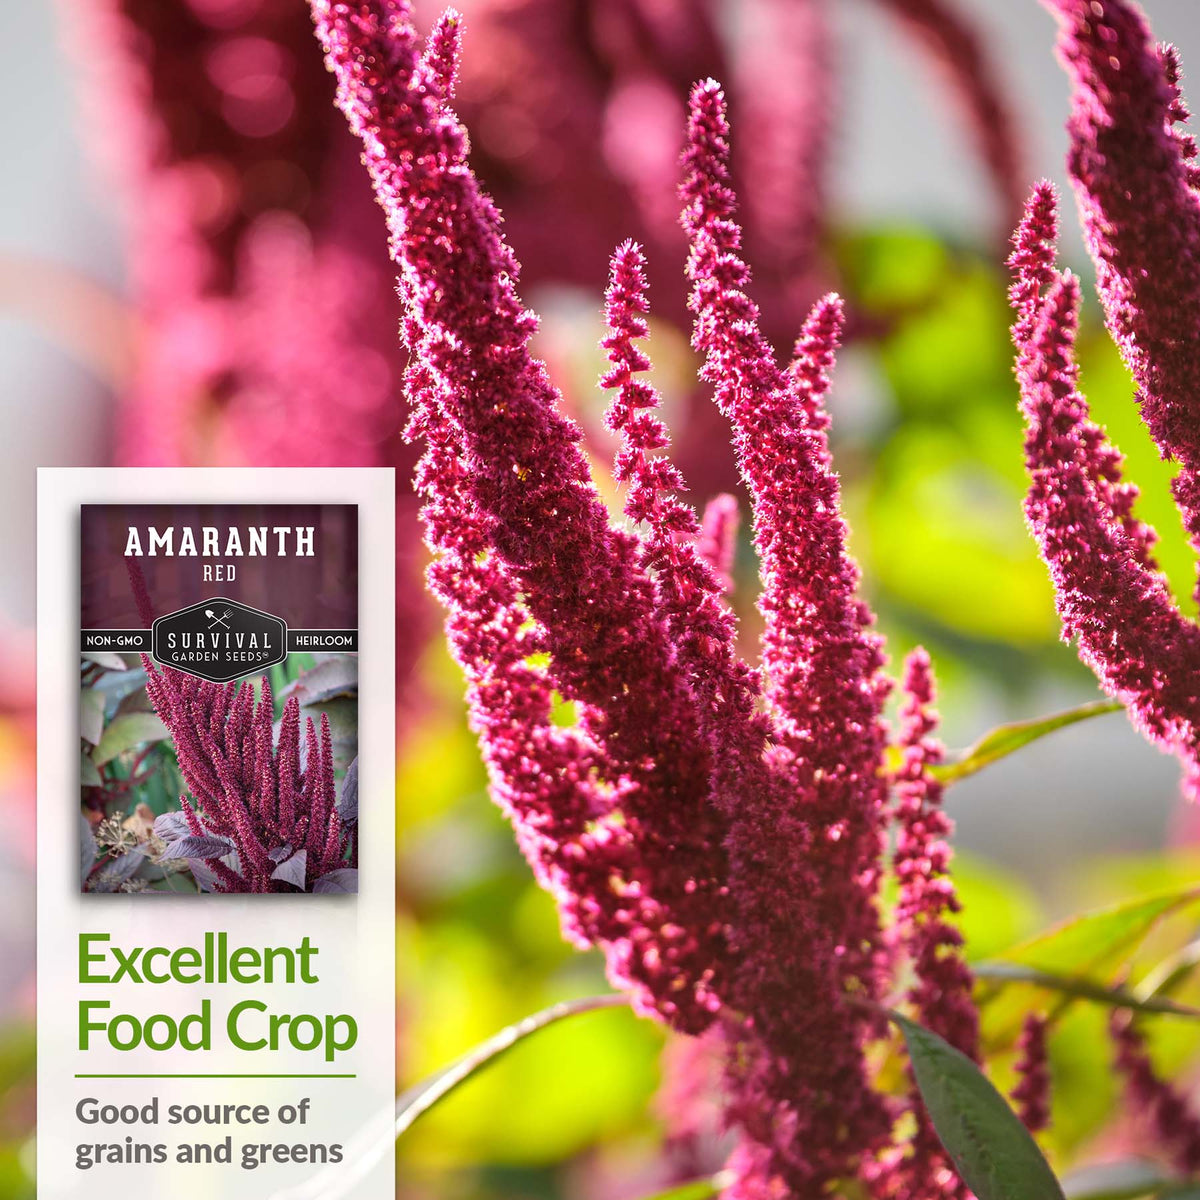 Red Amaranth is a good source of grains and greens